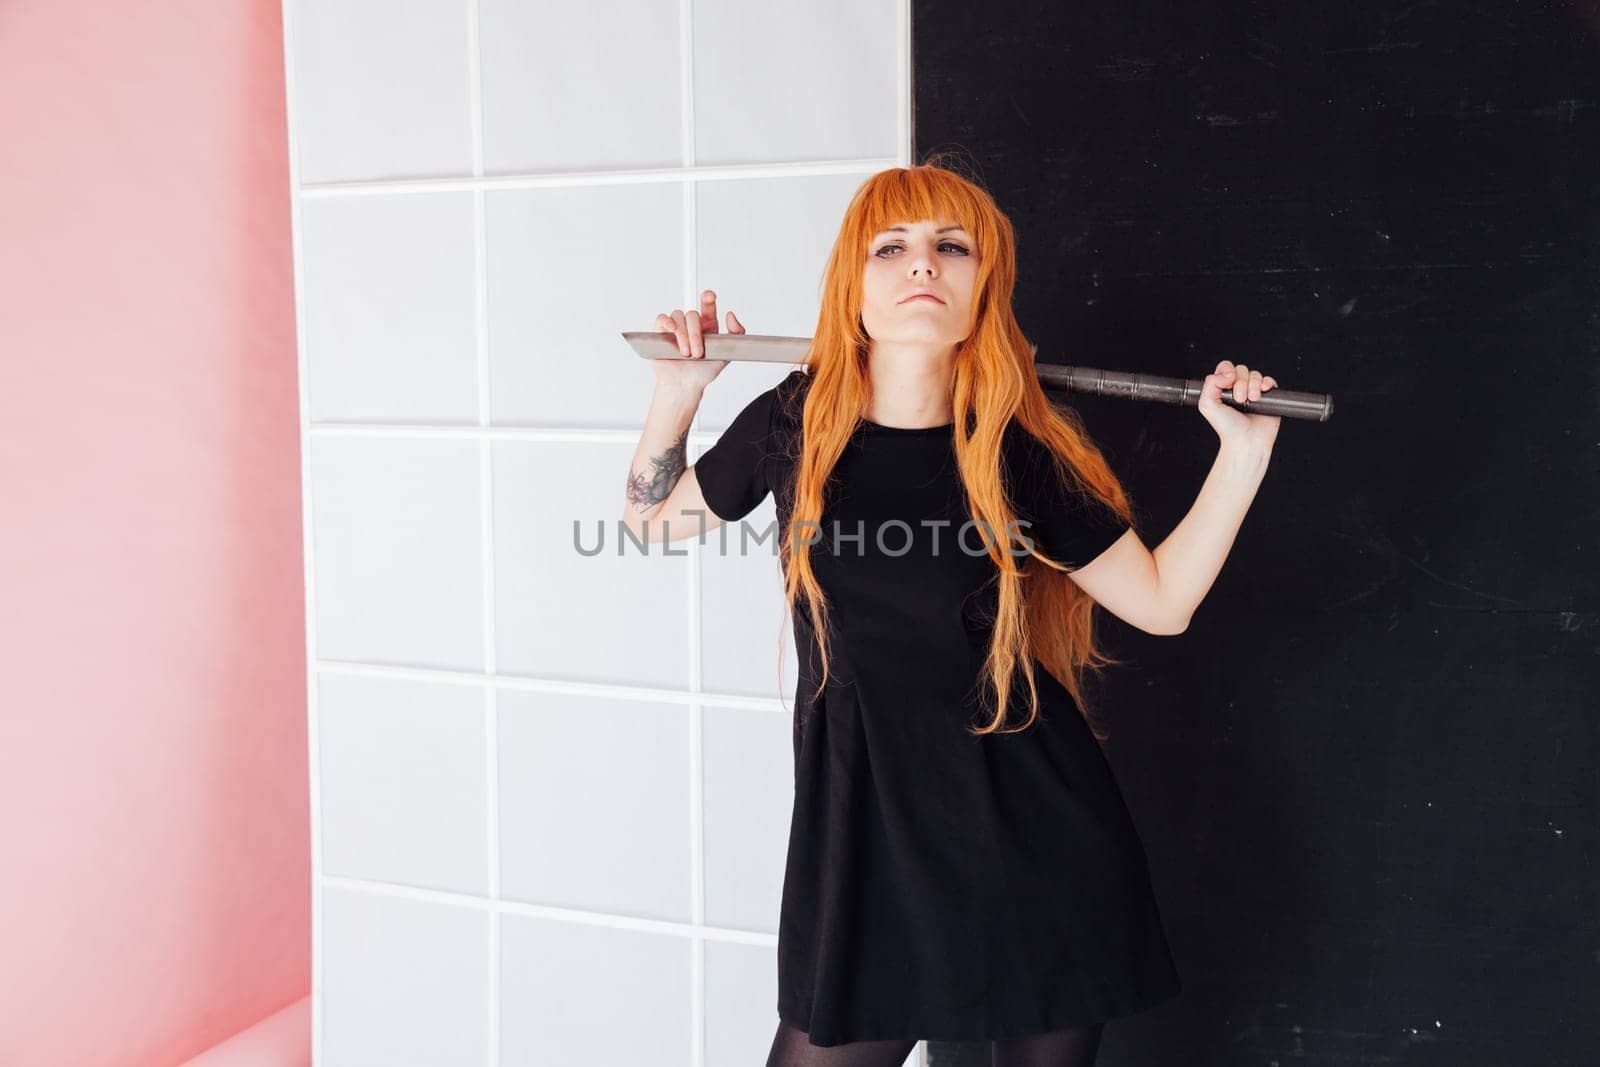 Woman cosplayer anime with red hair holds a Japanese sword by Simakov